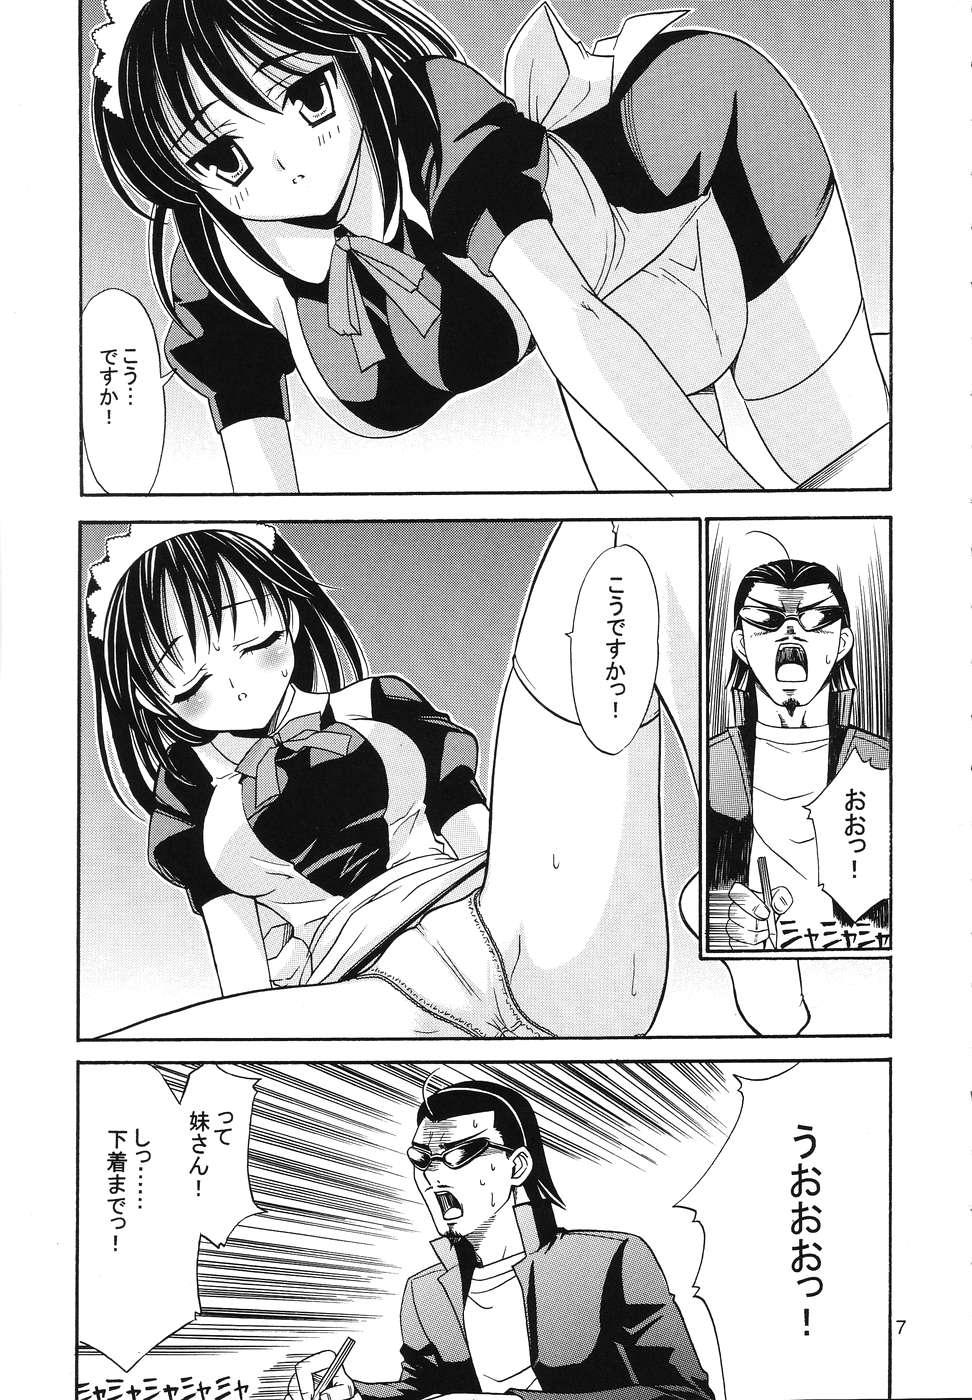 Caliente Hige-seito Harima! 3.5 - School rumble Chinese - Page 6